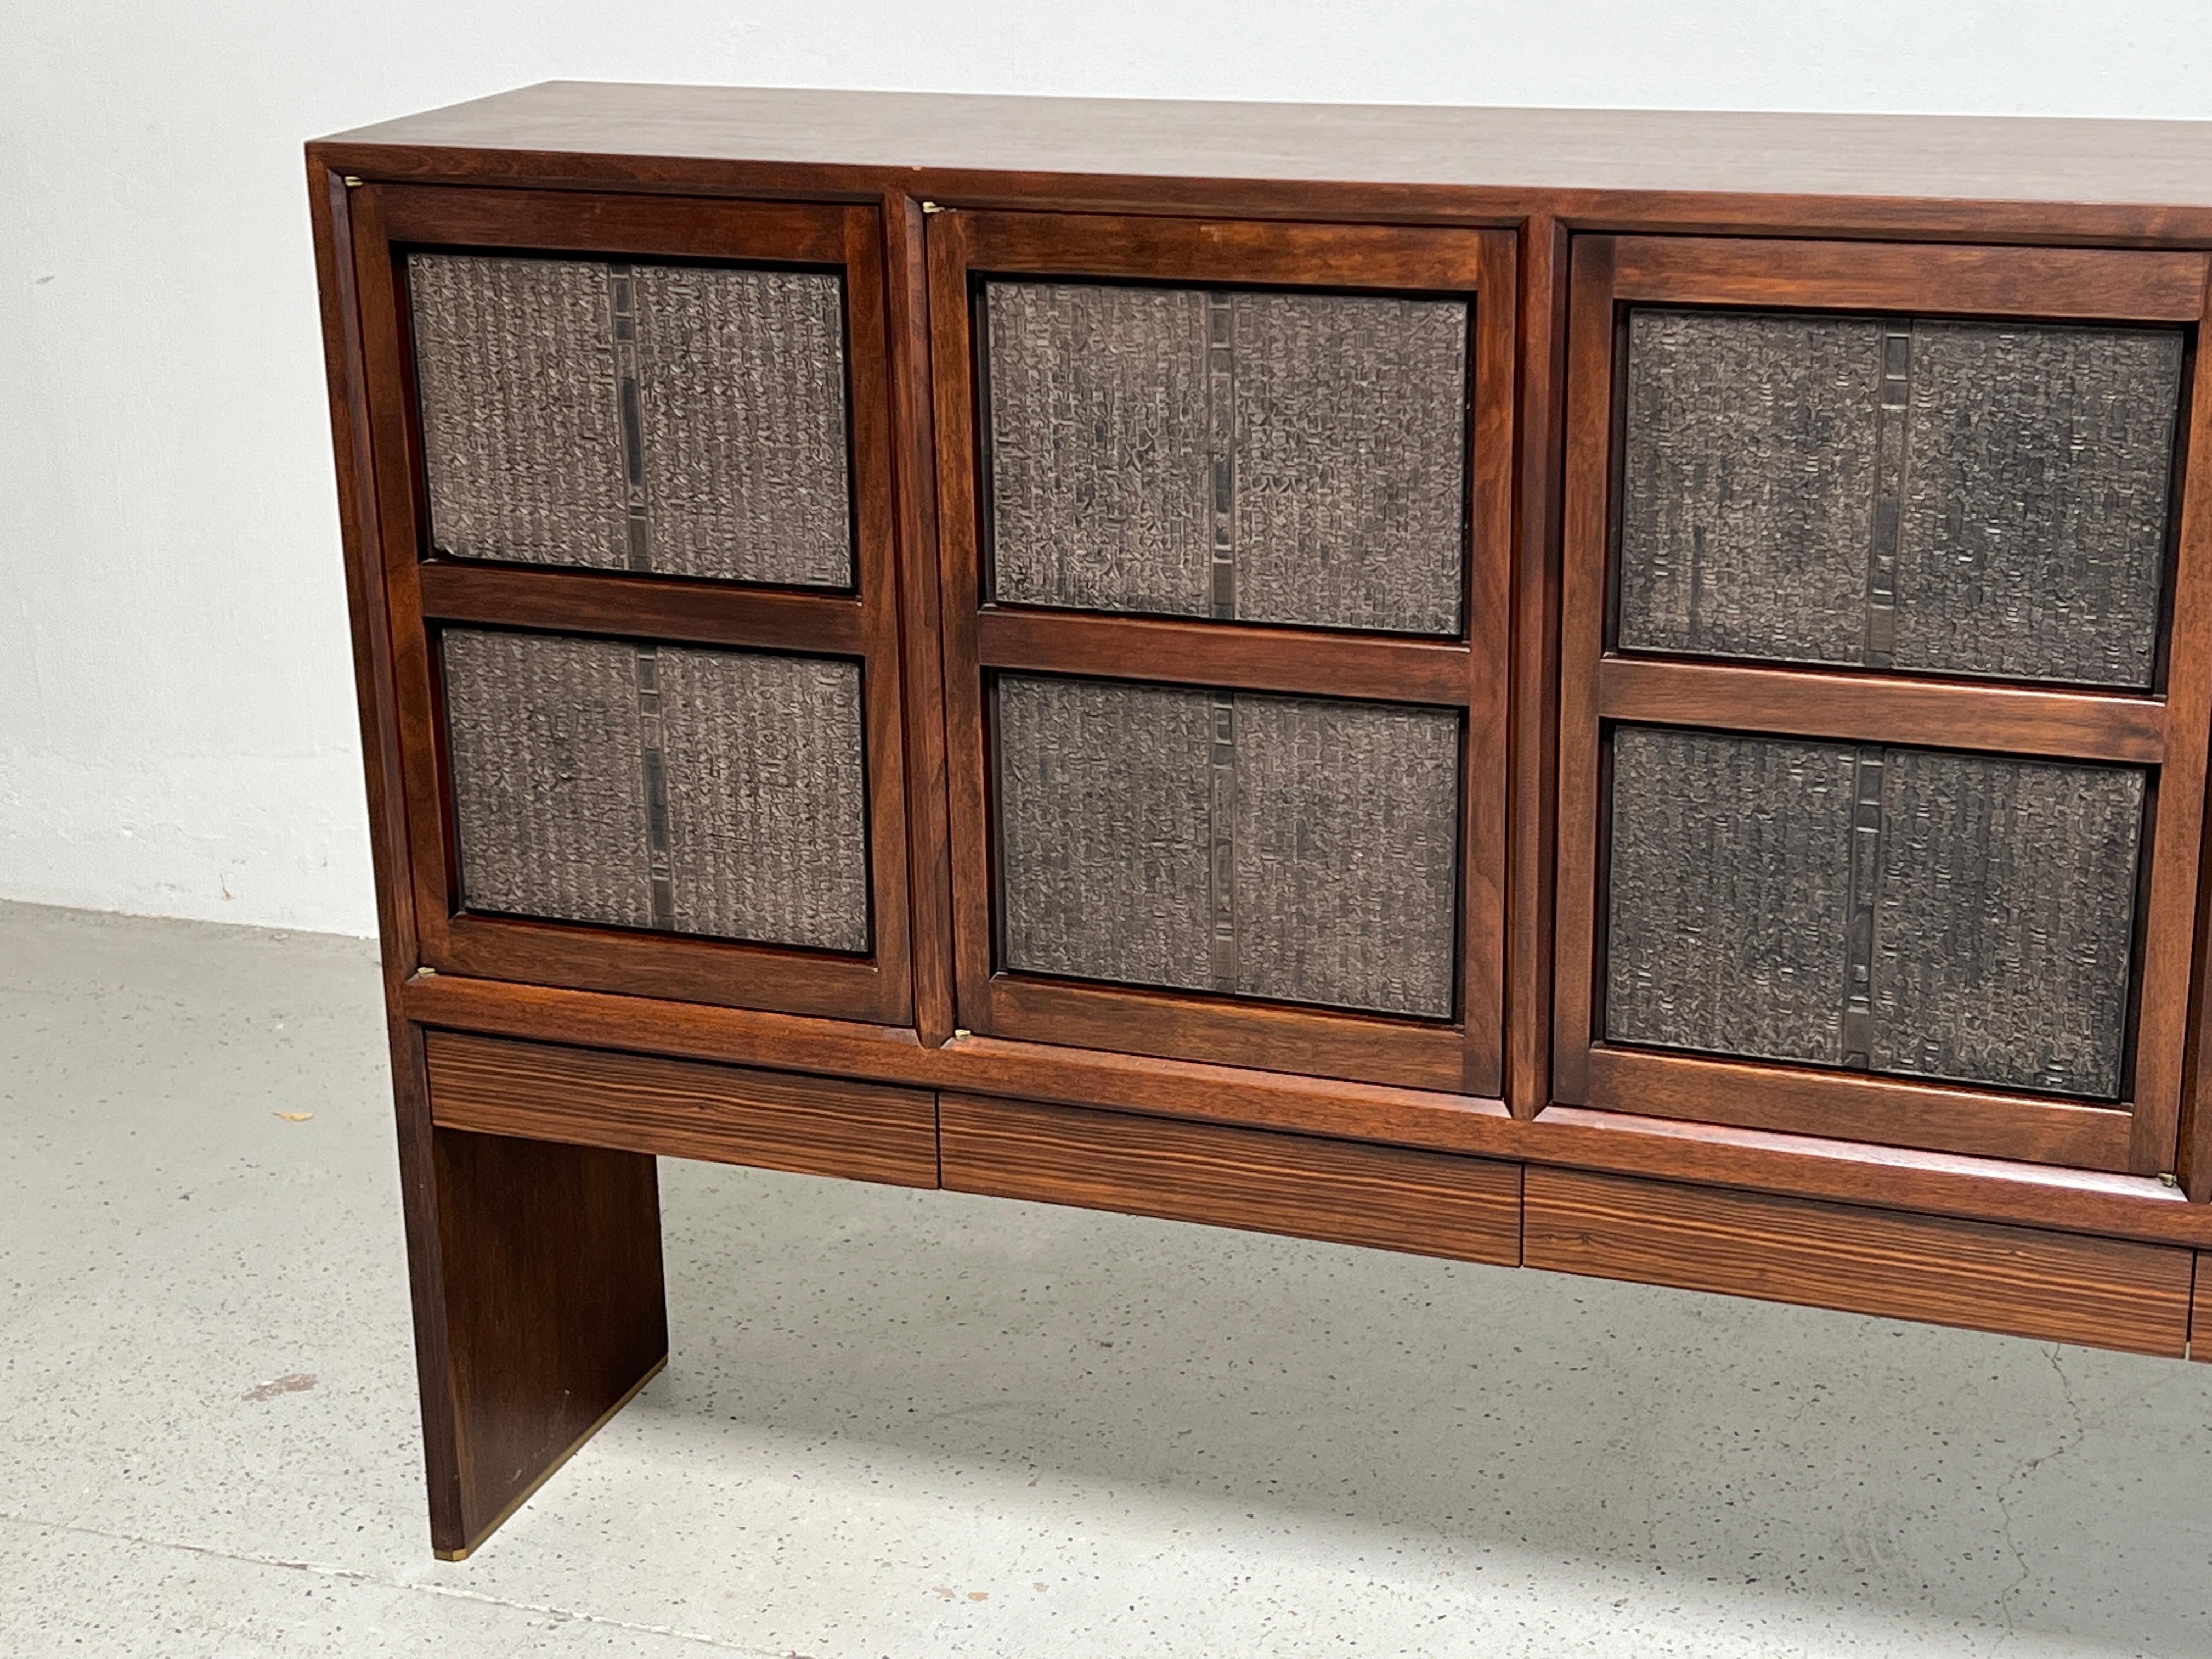 Mid-20th Century Edward Wormley for Dunbar Cabinet with Chinese Printing Blocks For Sale